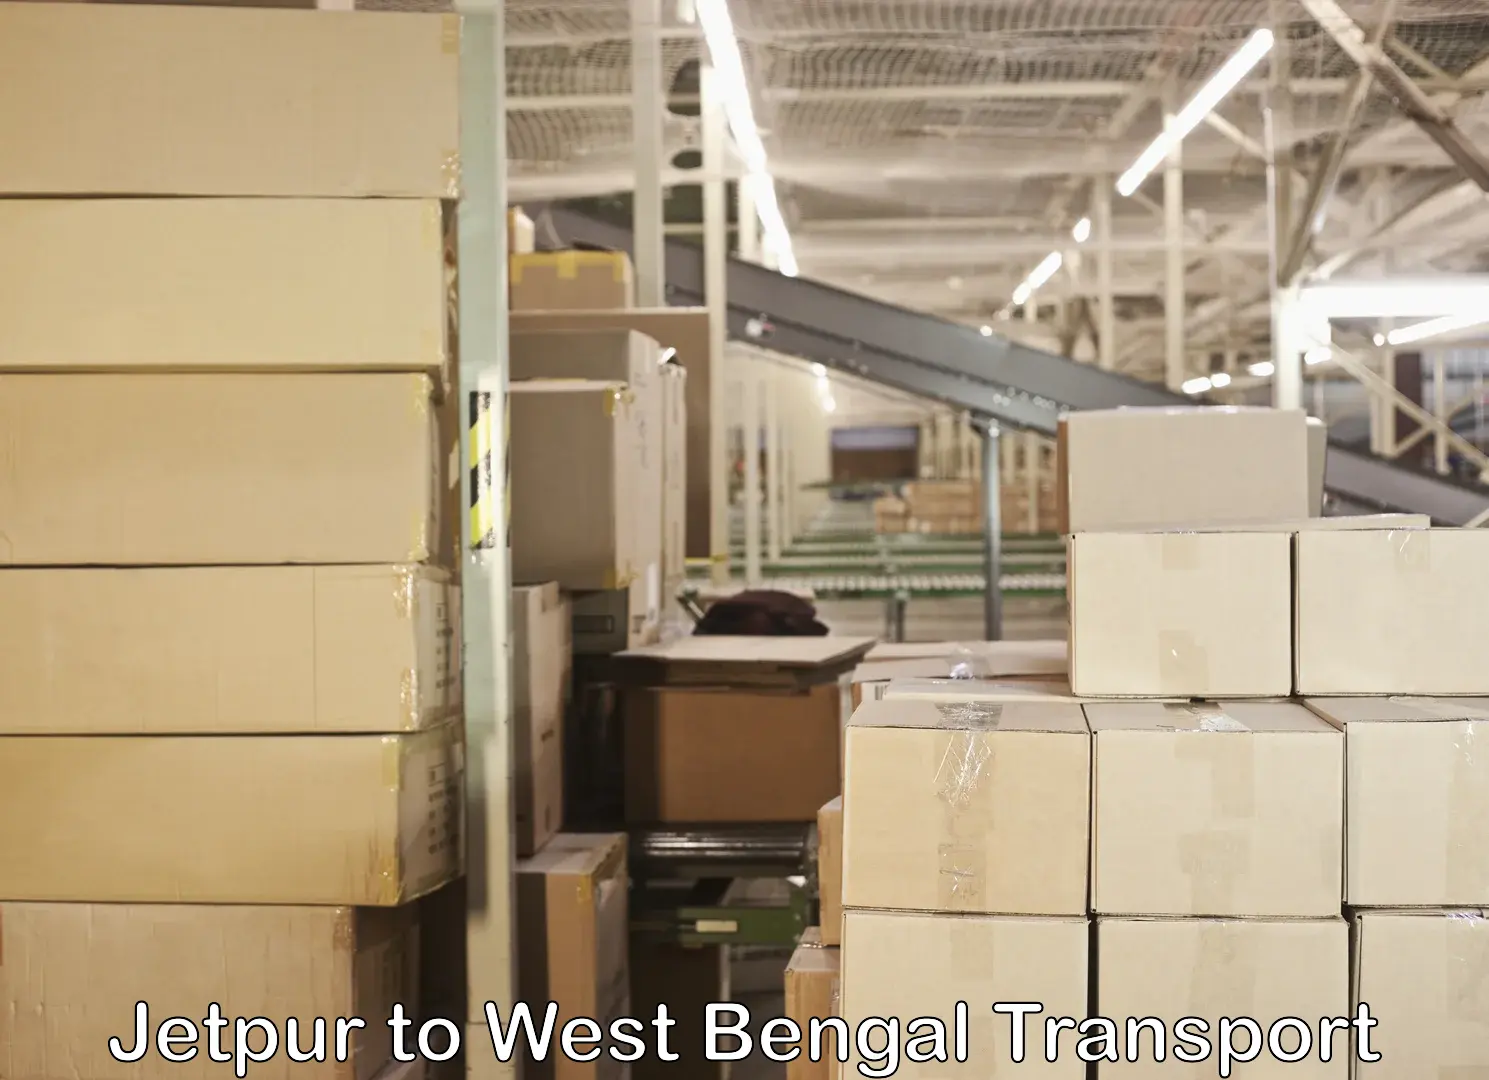 Truck transport companies in India Jetpur to Mouza Sibpur